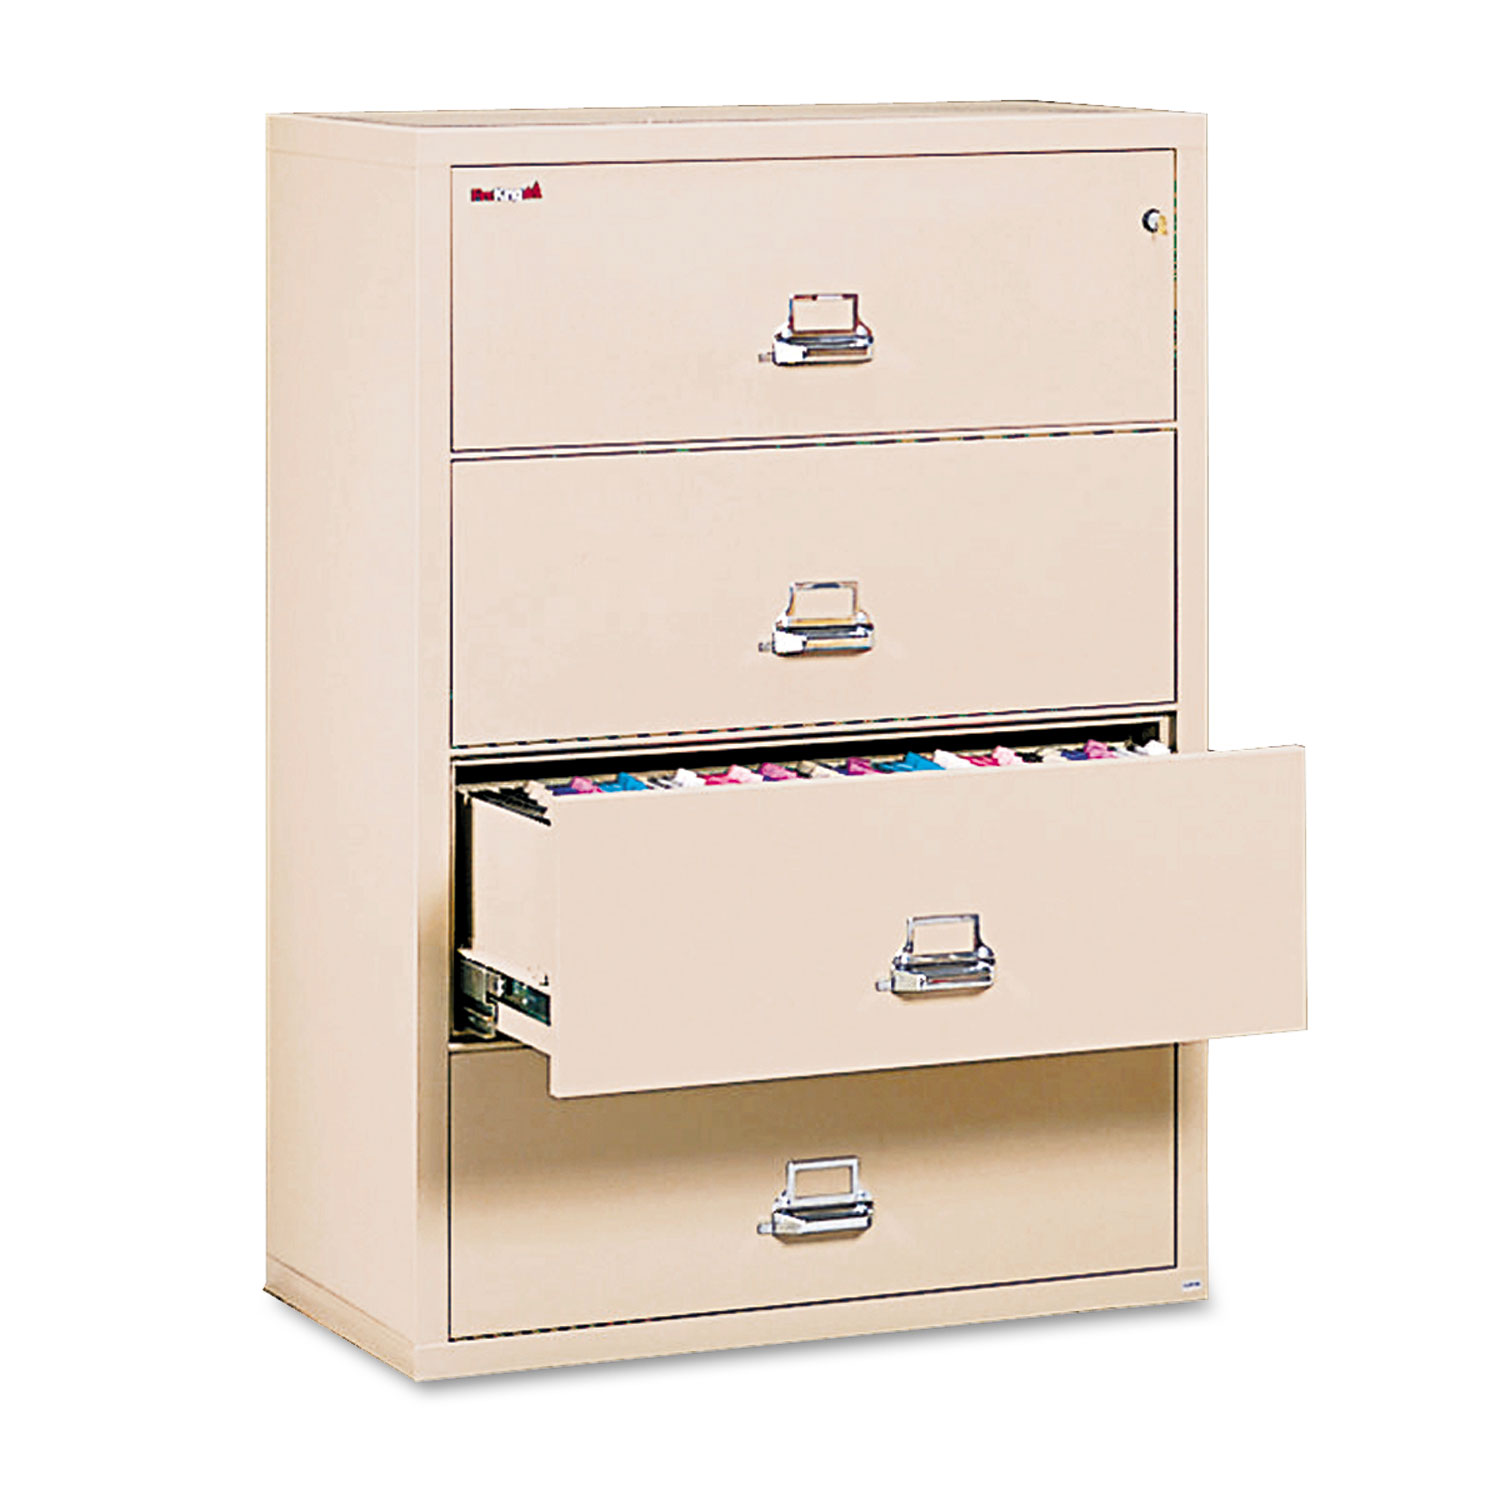 Four-Drawer Lateral File, 31-1/8 x 22-1/8, UL Listed 350°, Ltr/Legal, Parchment